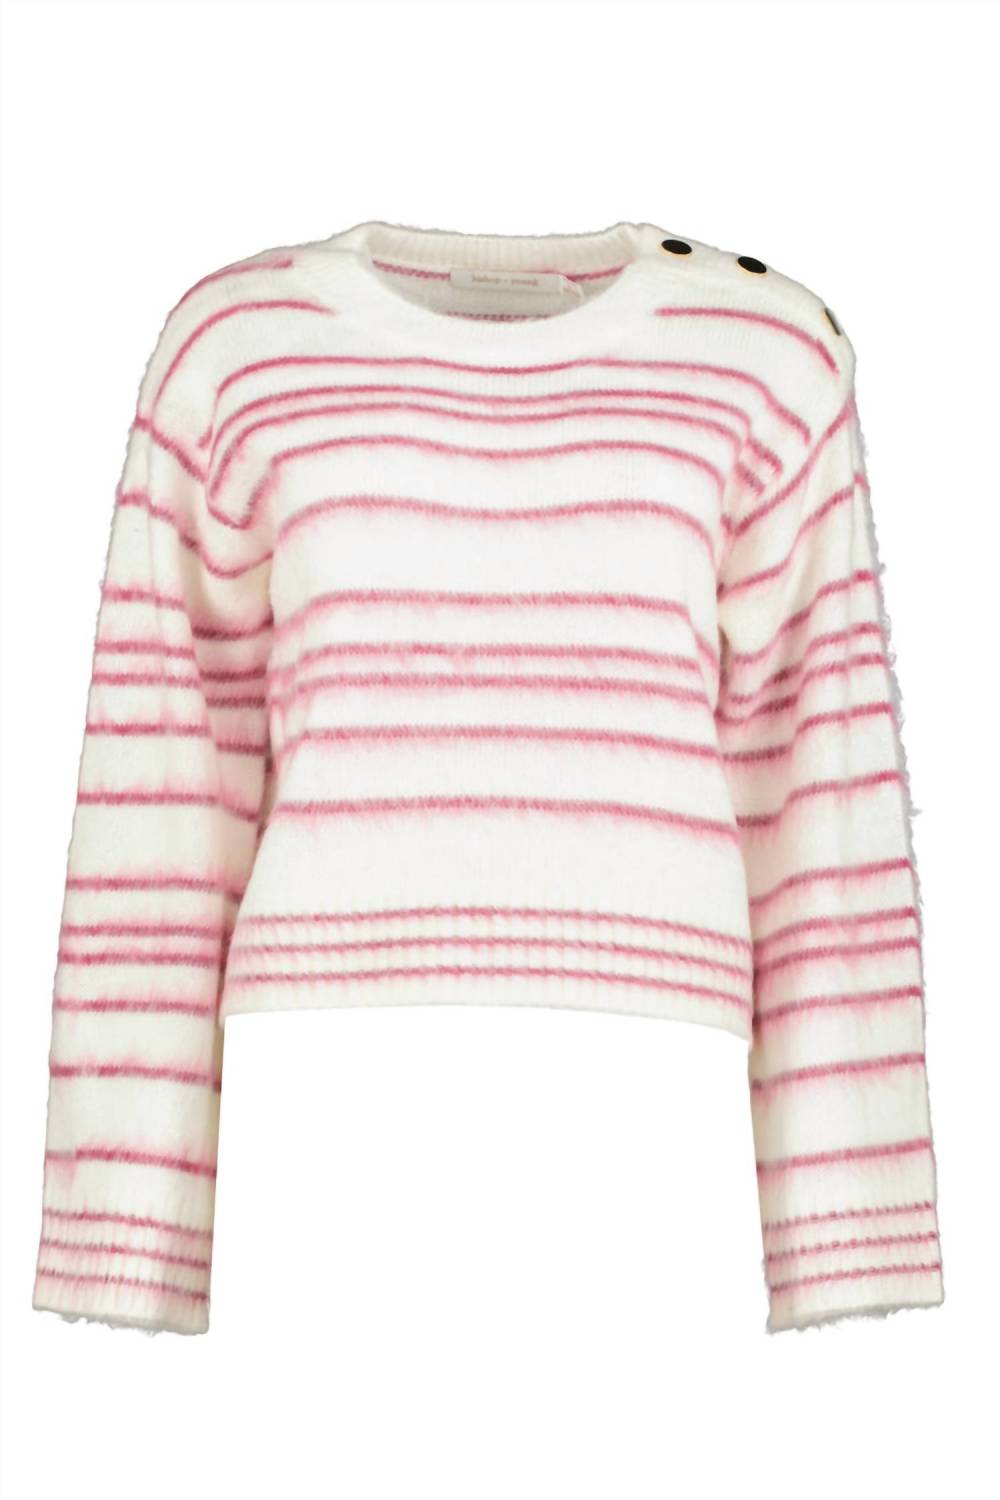 bishop + young - Noelle Stripe Fuzzy Sweater